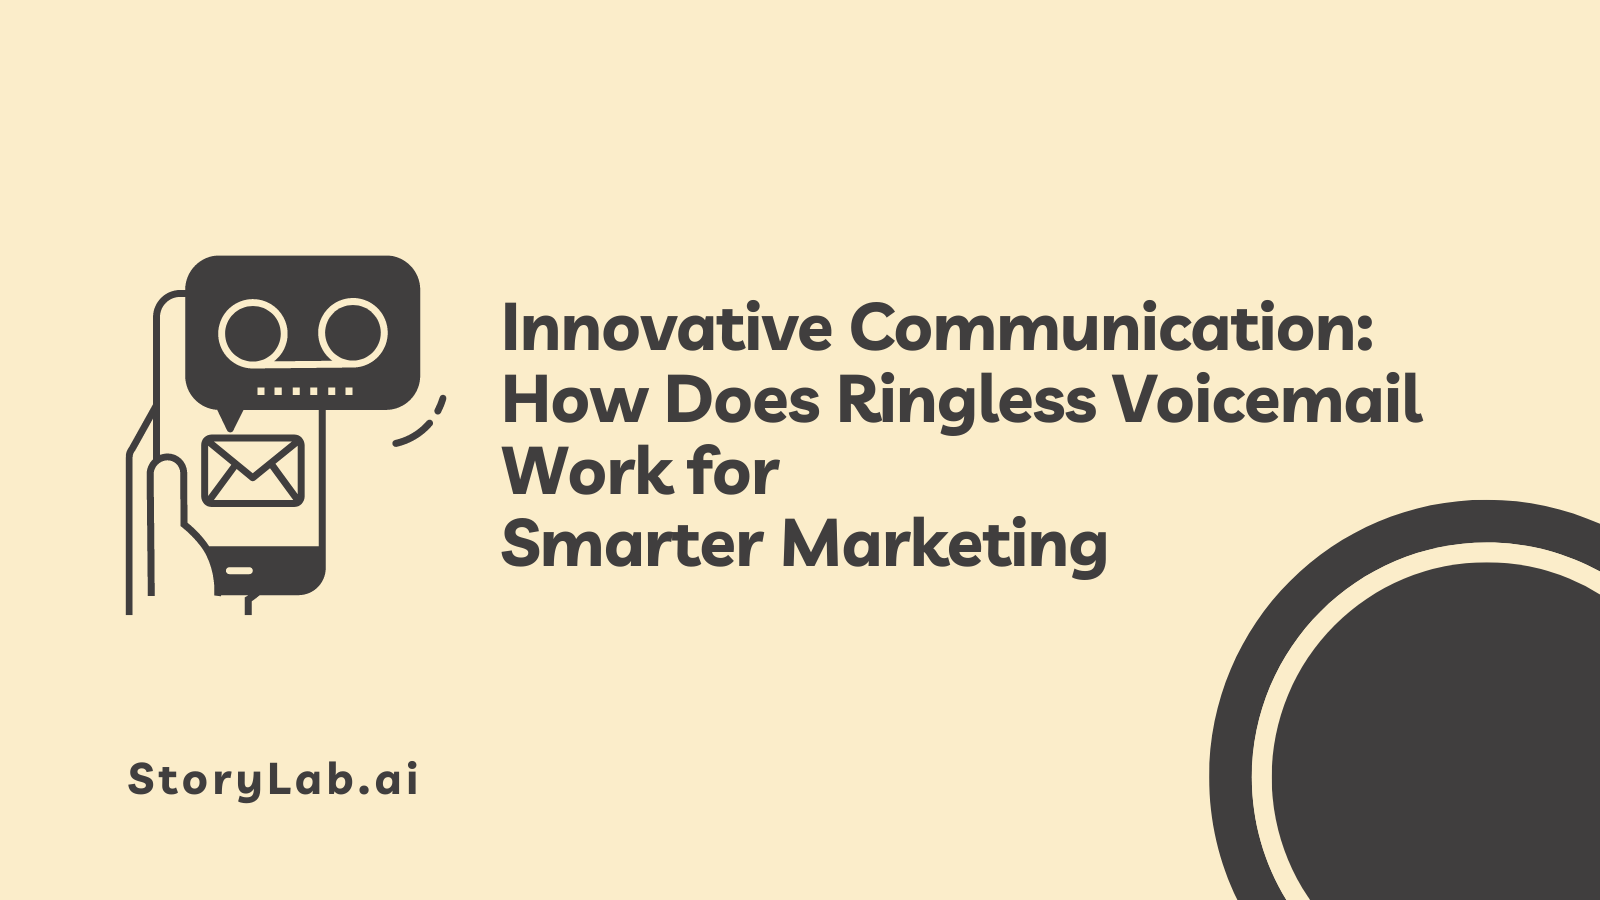 Innovative Communication How Does Ringless Voicemail Work for Smarter Marketing